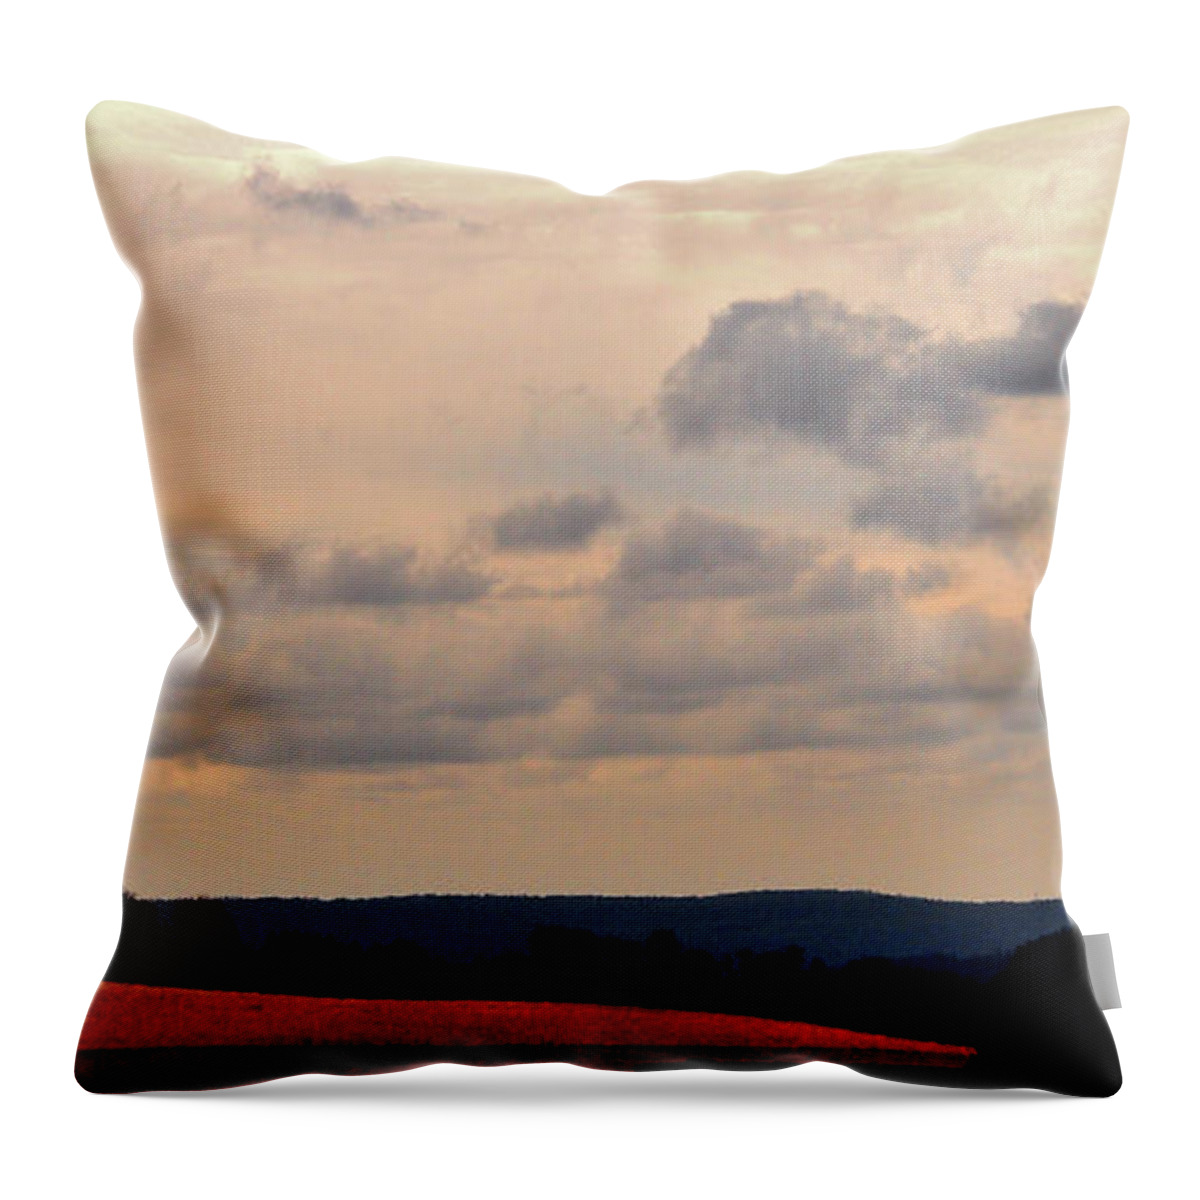 Landscape Throw Pillow featuring the photograph Glowing Field by Lori Tambakis